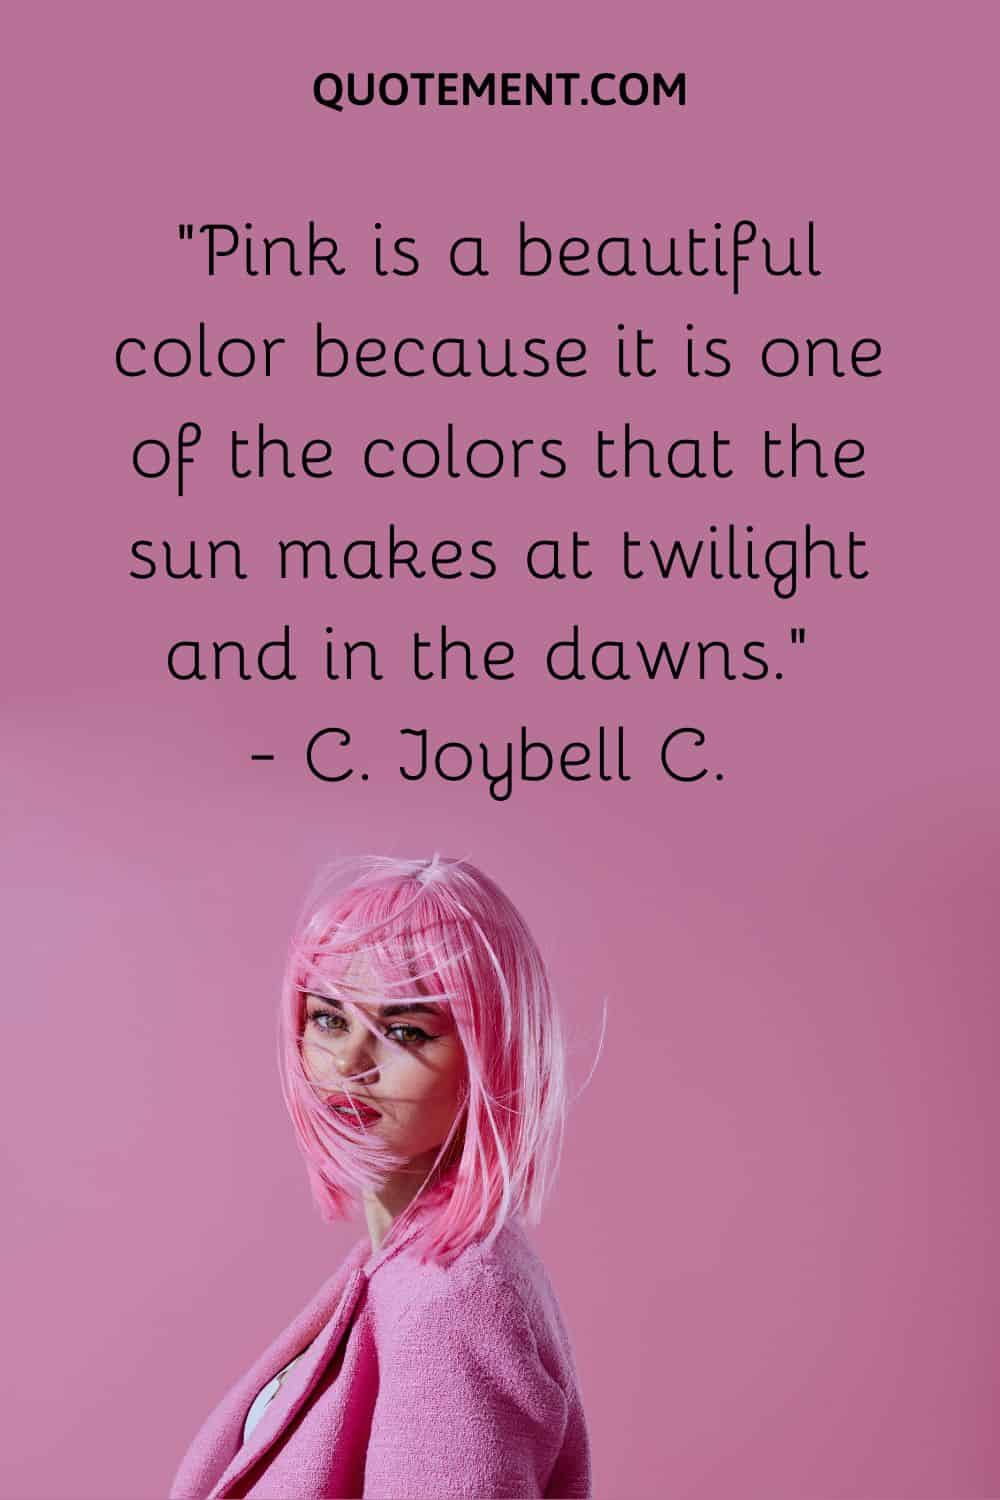 Pink is a beautiful color because it is one of the colors that the sun makes at twilight and in the dawns